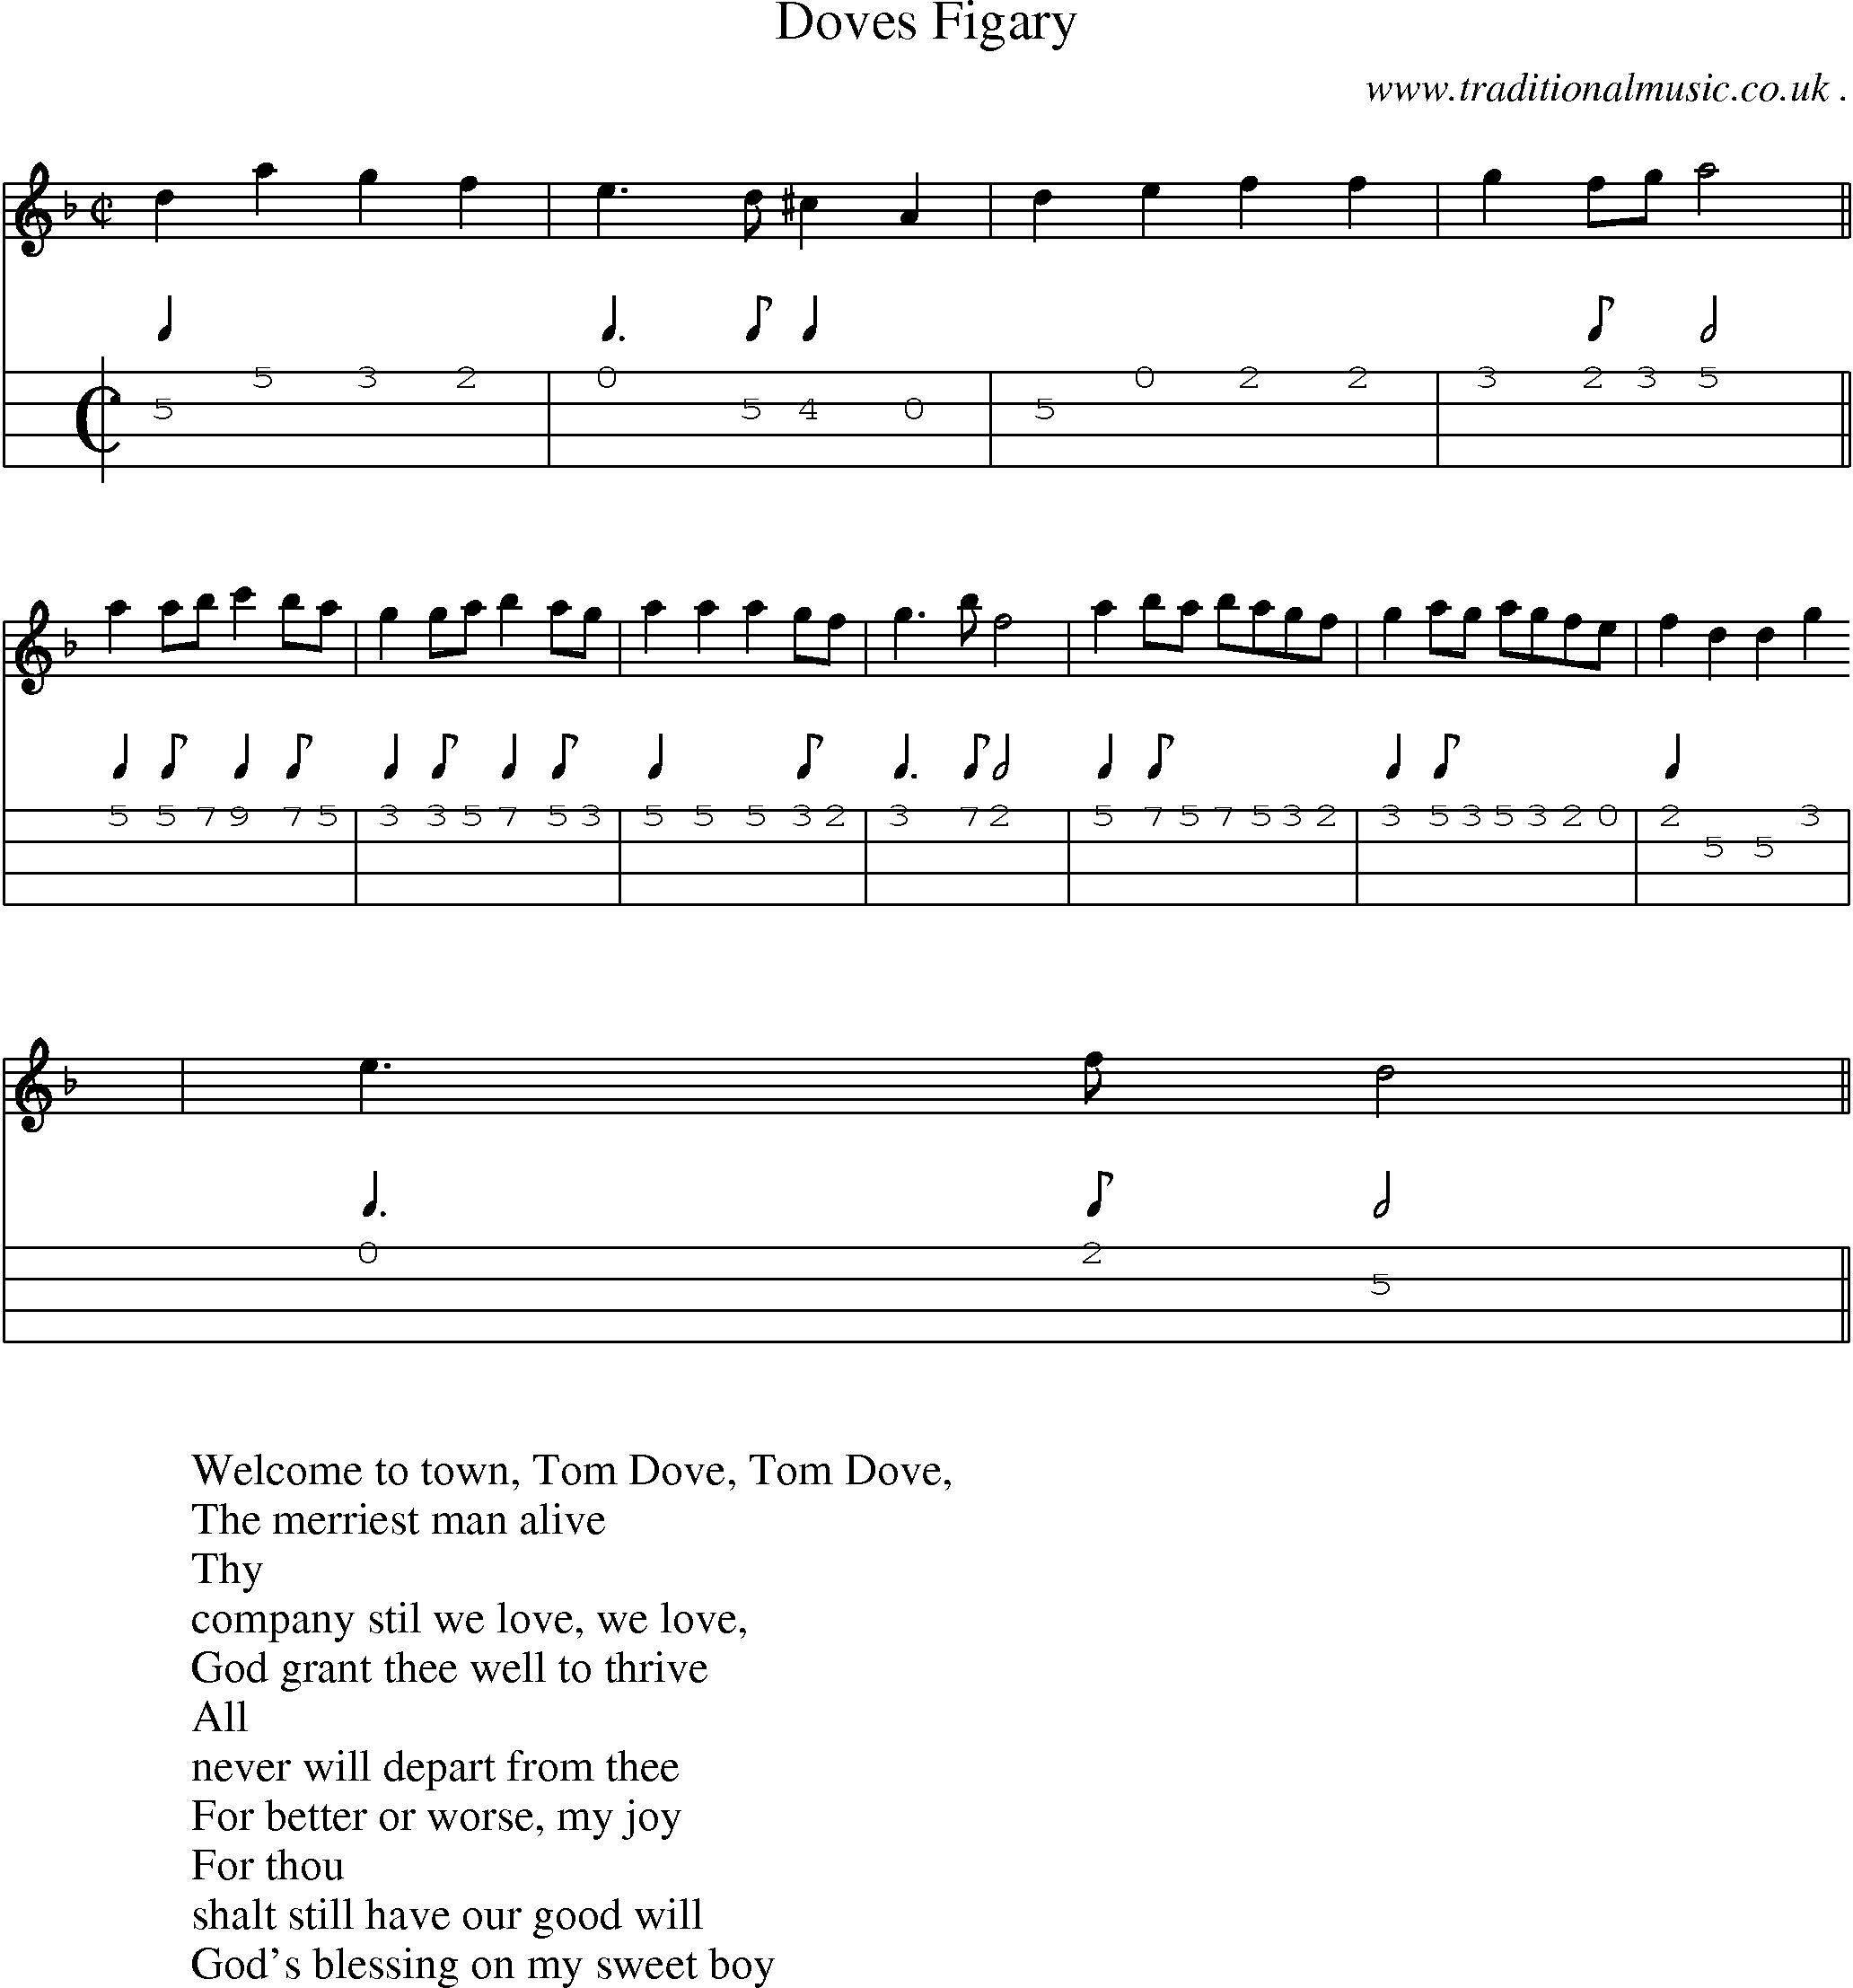 Sheet-Music and Mandolin Tabs for Doves Figary